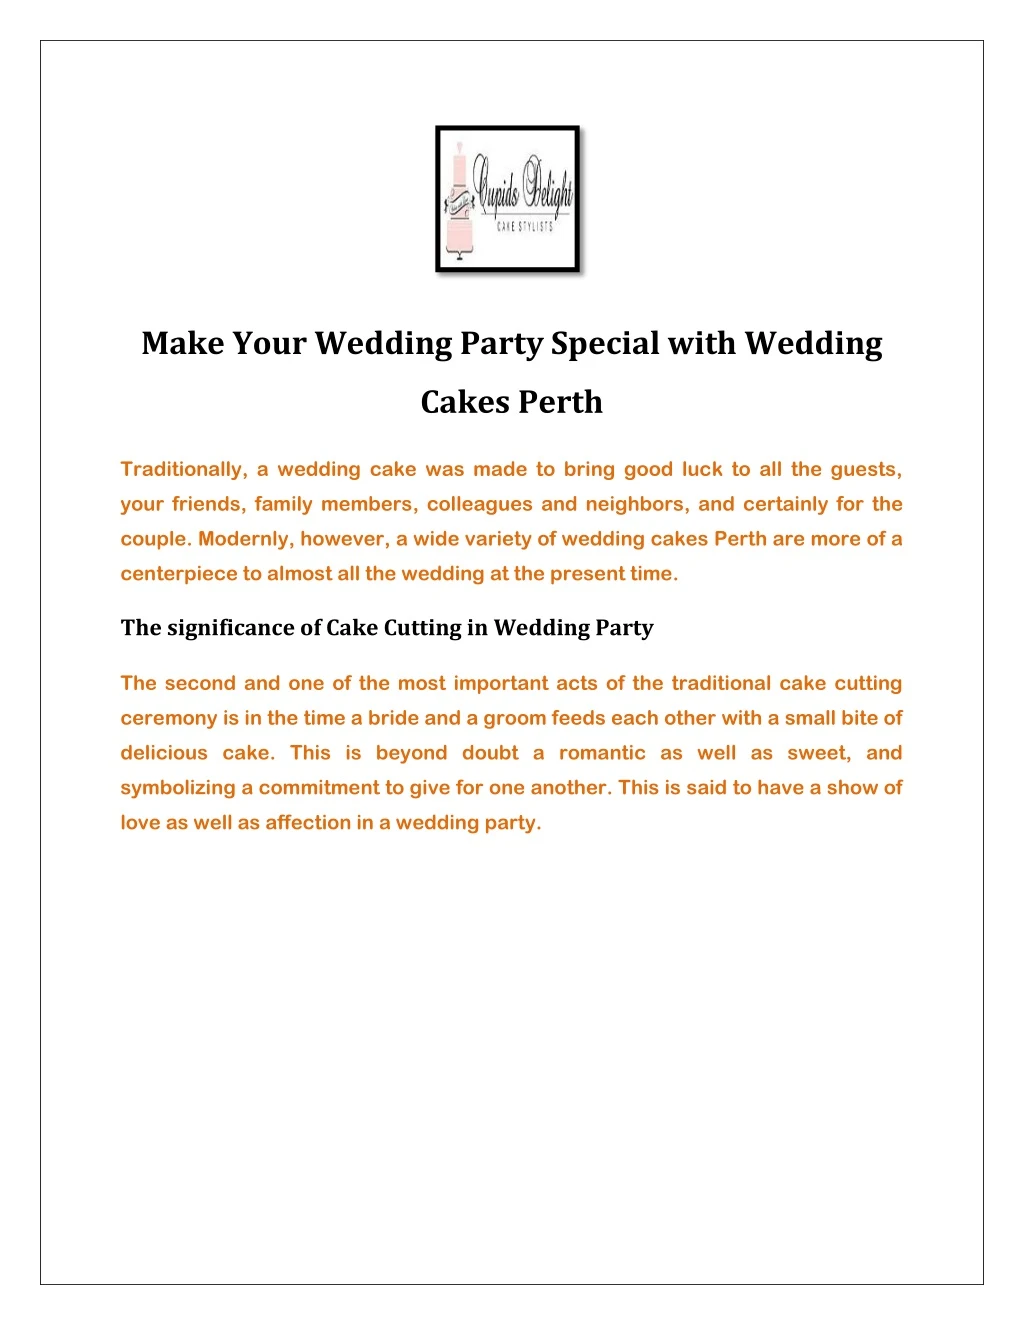 make your wedding party special with wedding